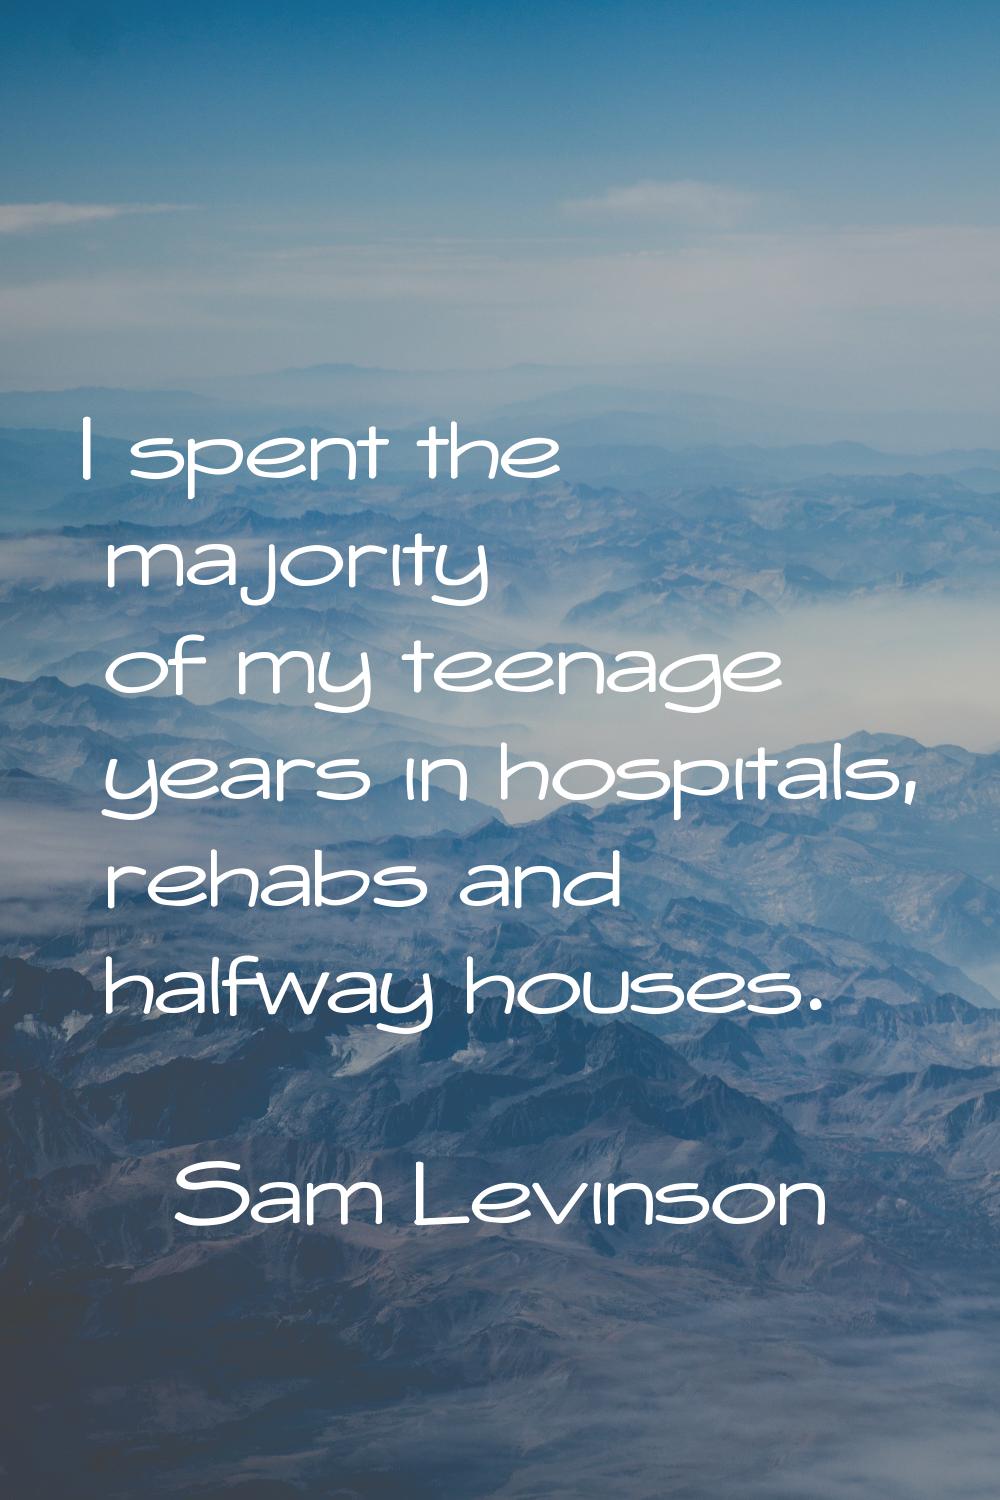 I spent the majority of my teenage years in hospitals, rehabs and halfway houses.